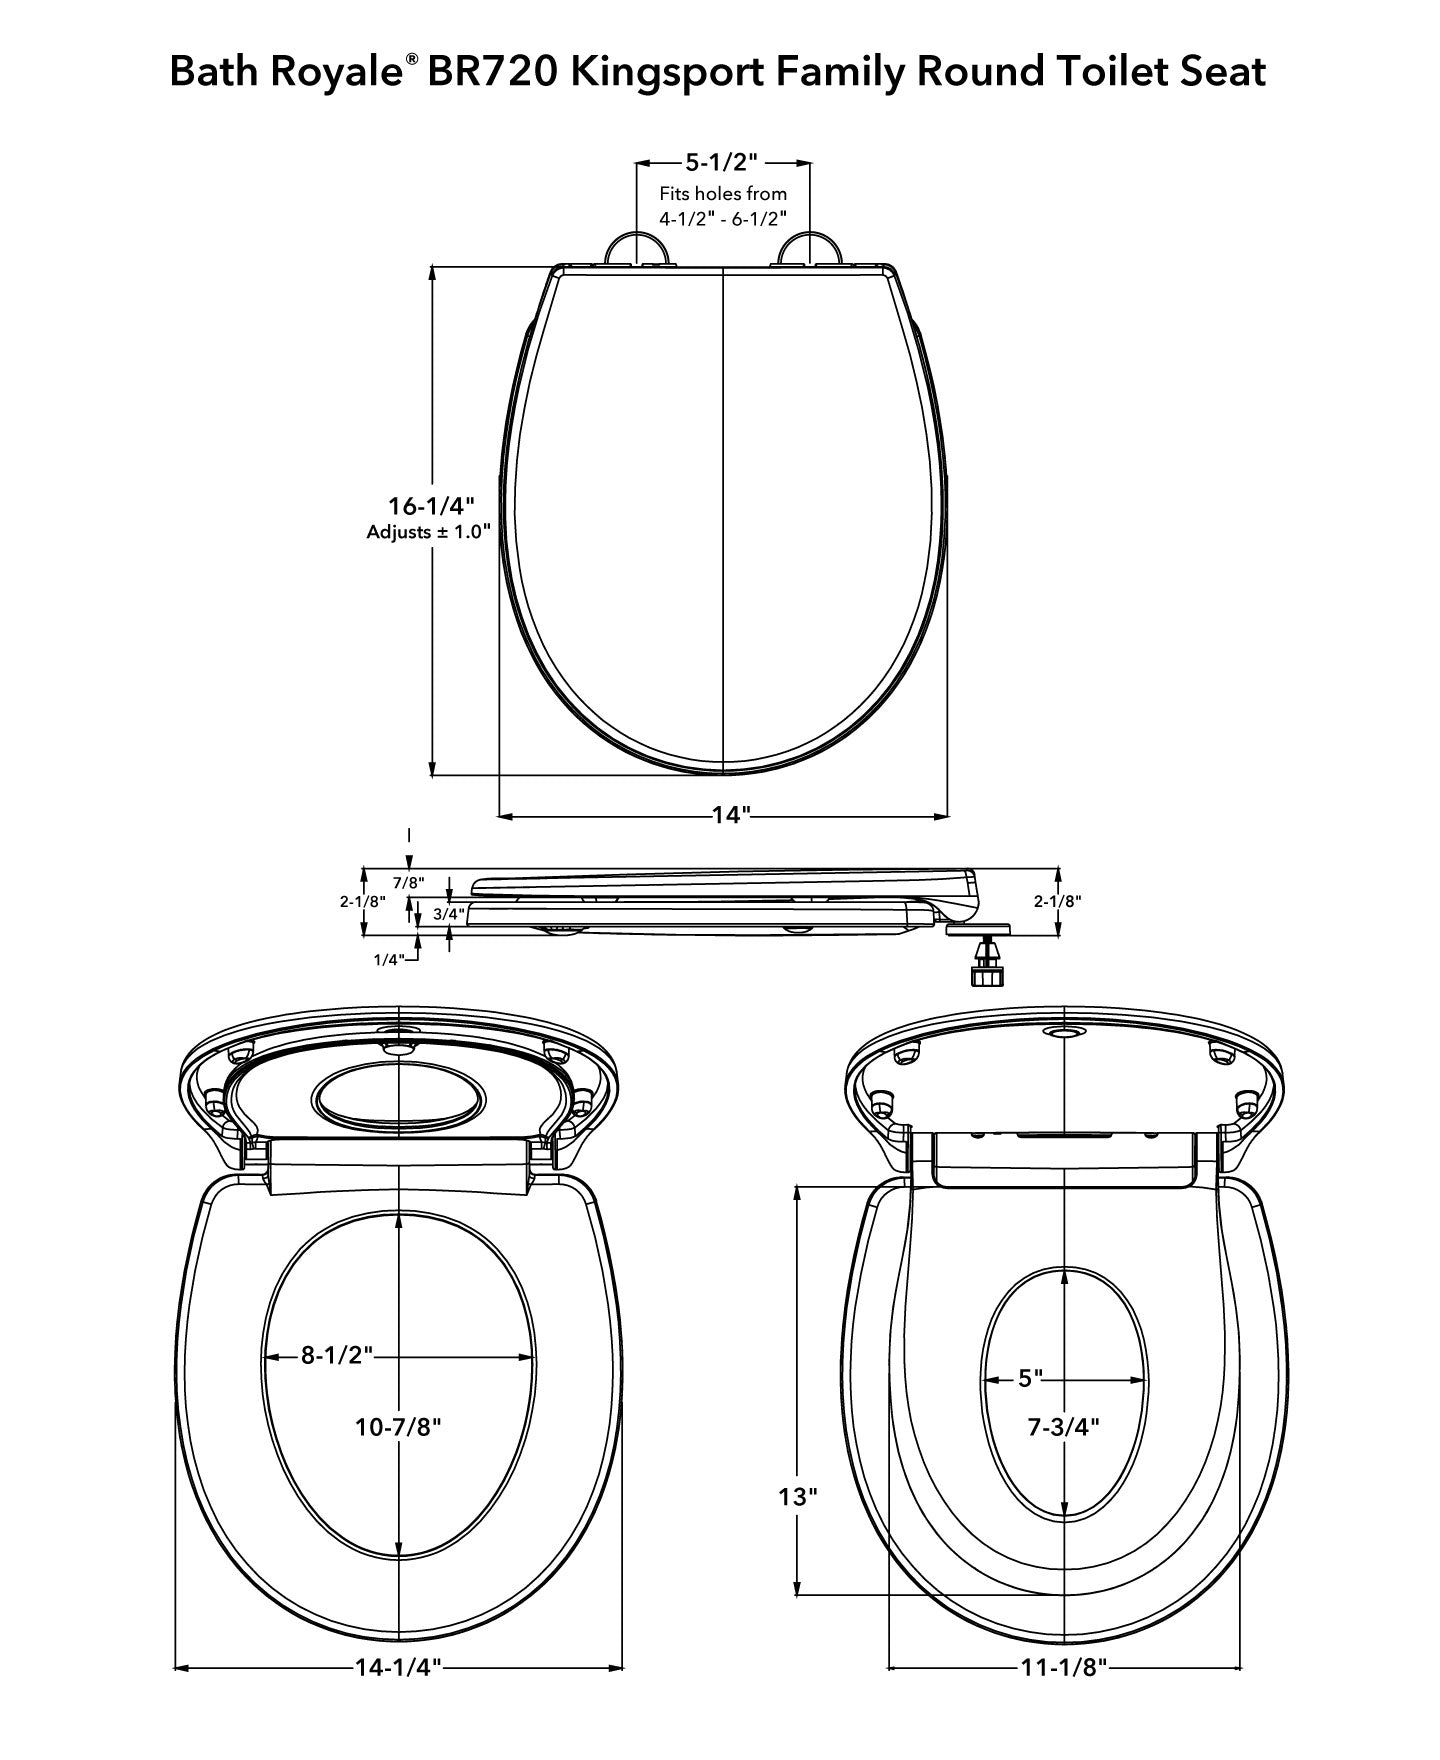 Dimensions of Round Kingsport Family Toilet Seat with Built-In Child Seat